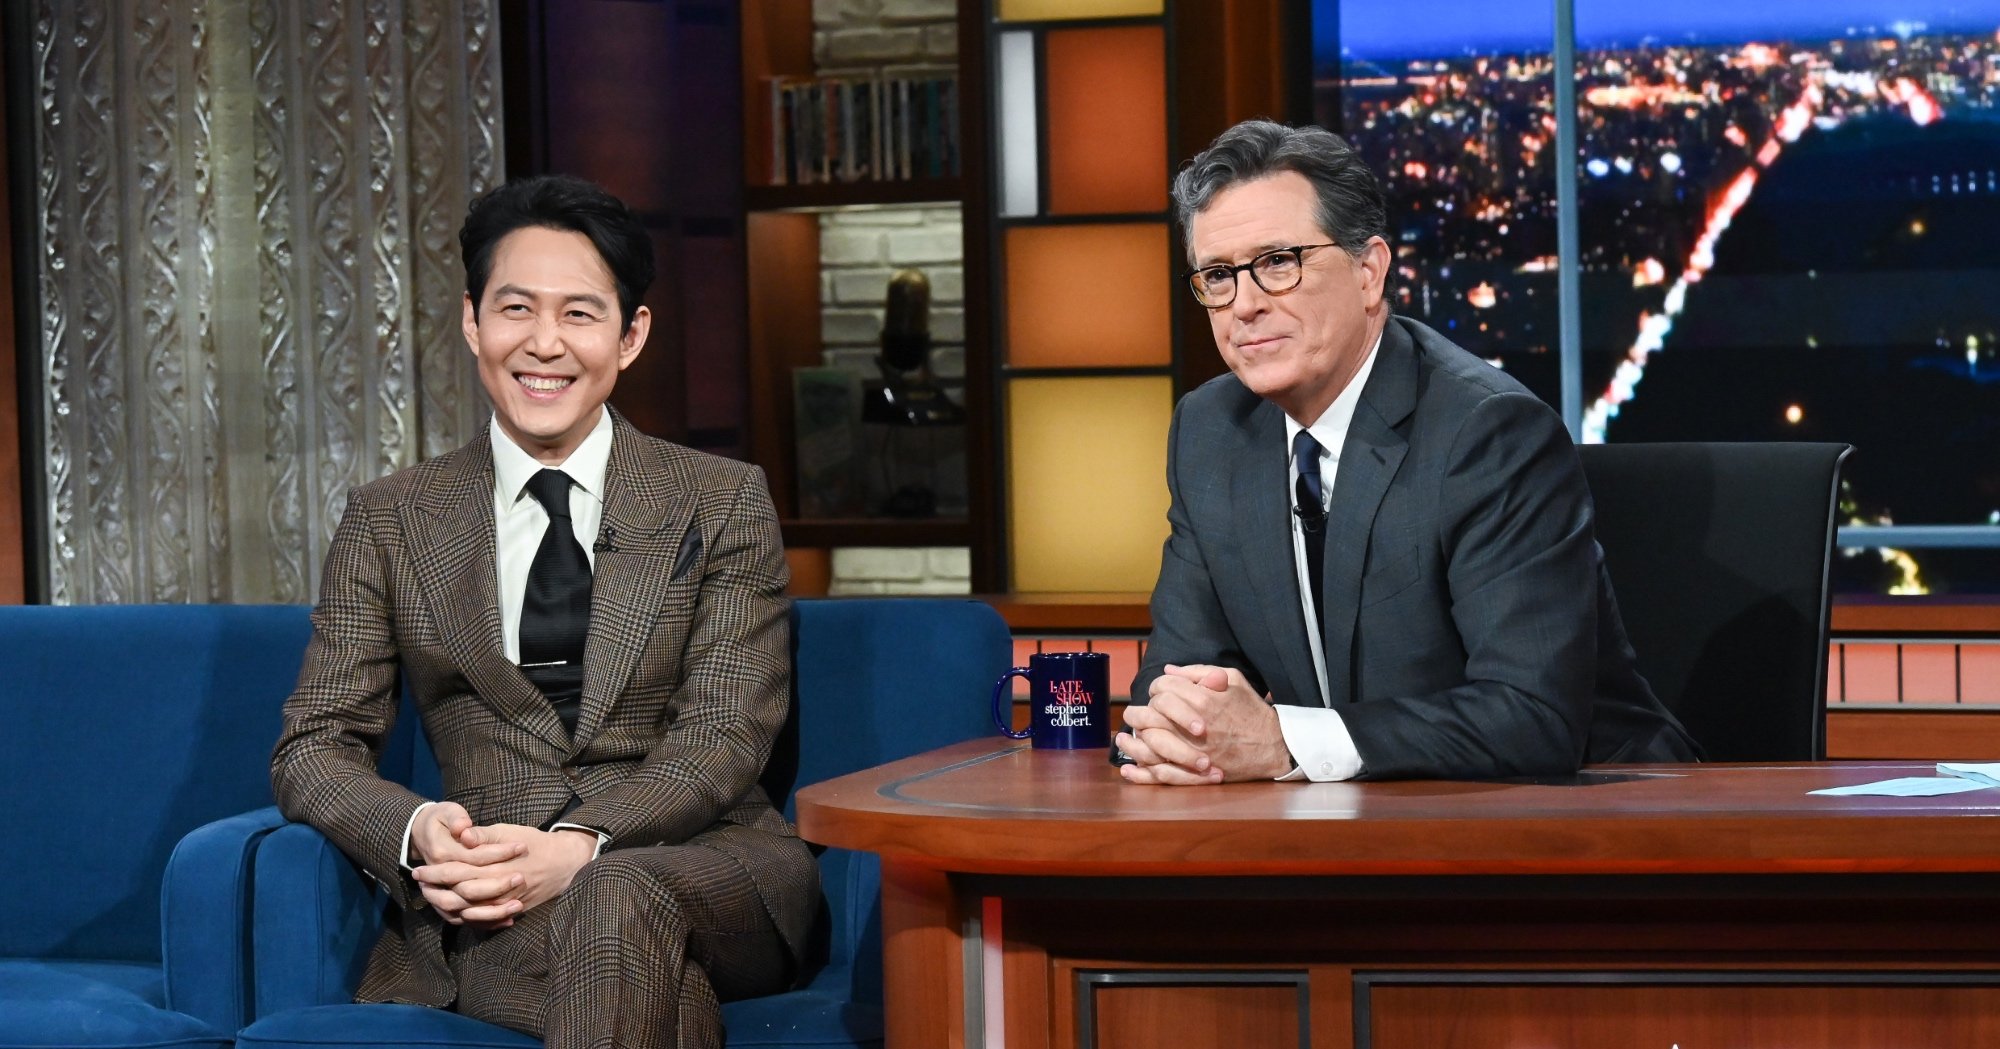 'The Late Show with Stephen Colbert' and guest Lee Jung-Jae wearing a suit and tie on set.